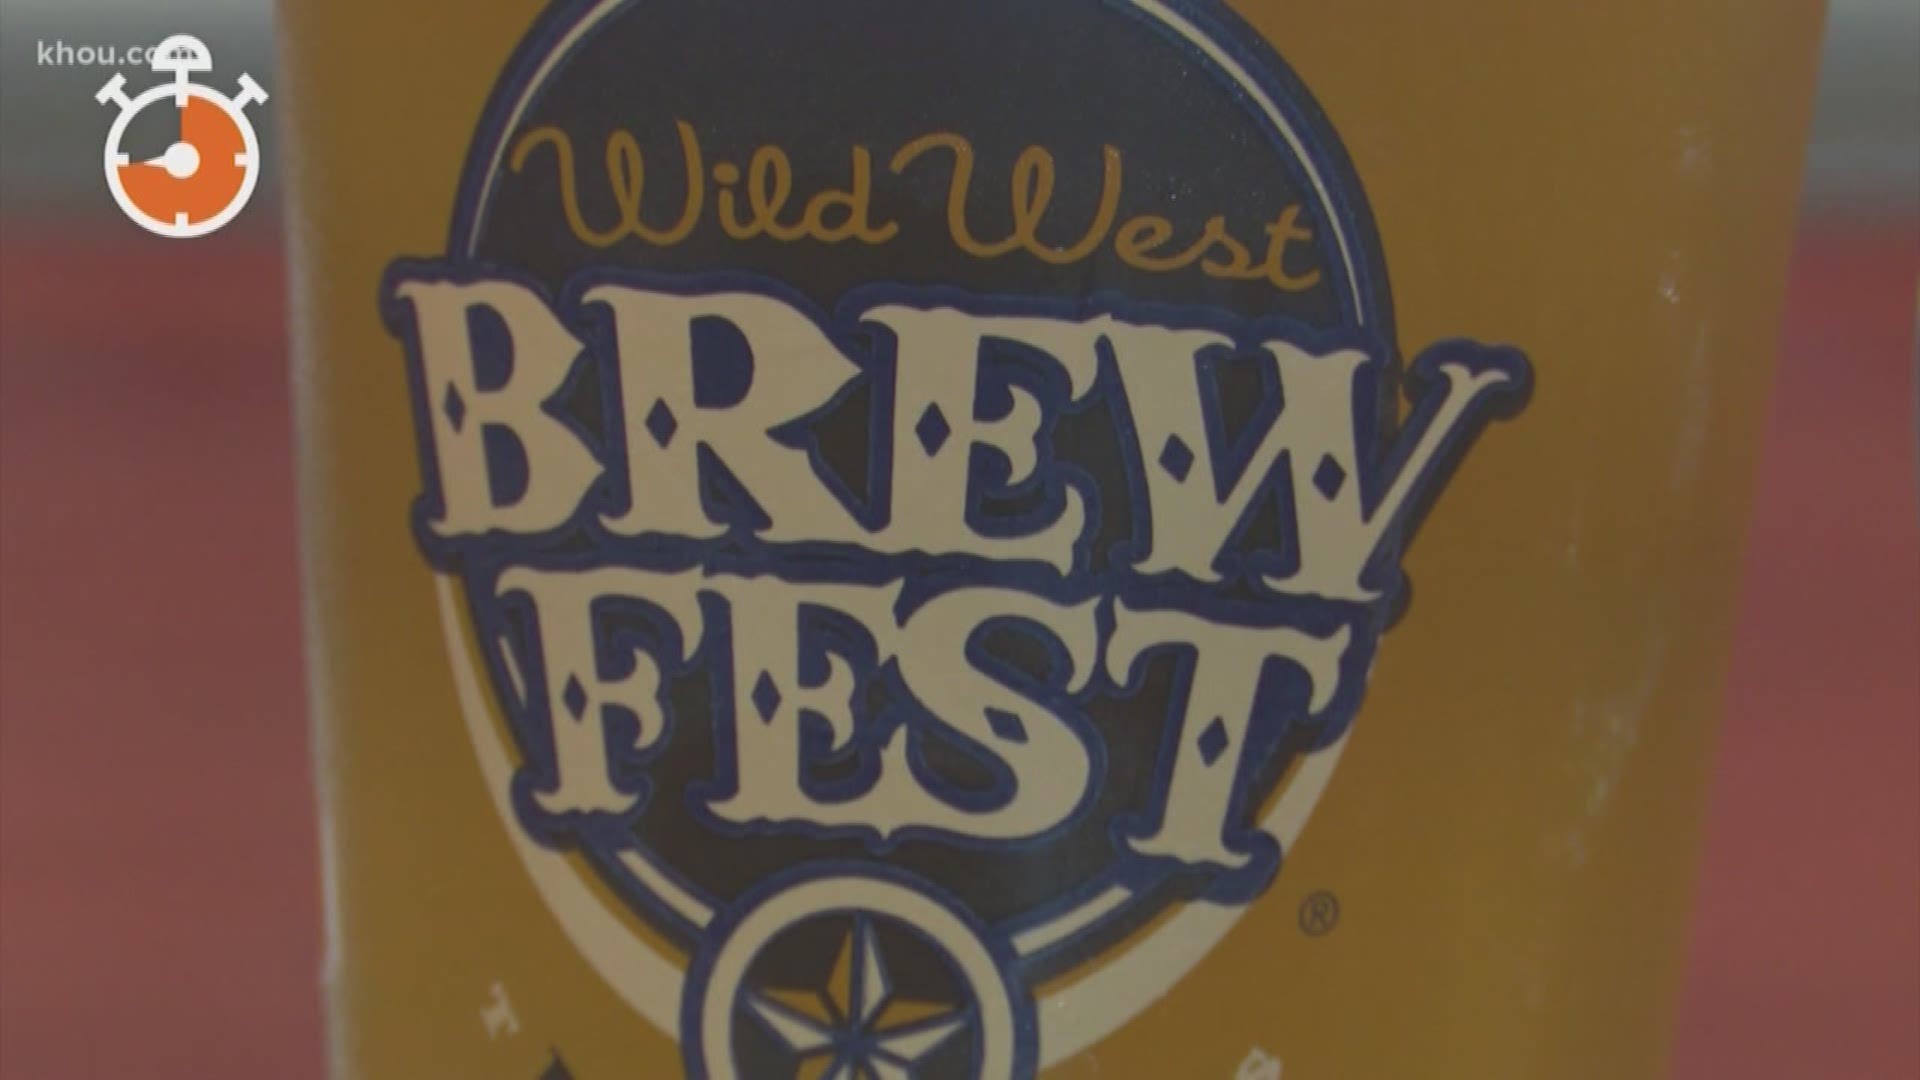 A huge beer event is brewing in Katy this weekend. But it's not just about what's on tap. The community is tapping into some benefits too. Brandi Smith will show you how in this morning's HTown60.